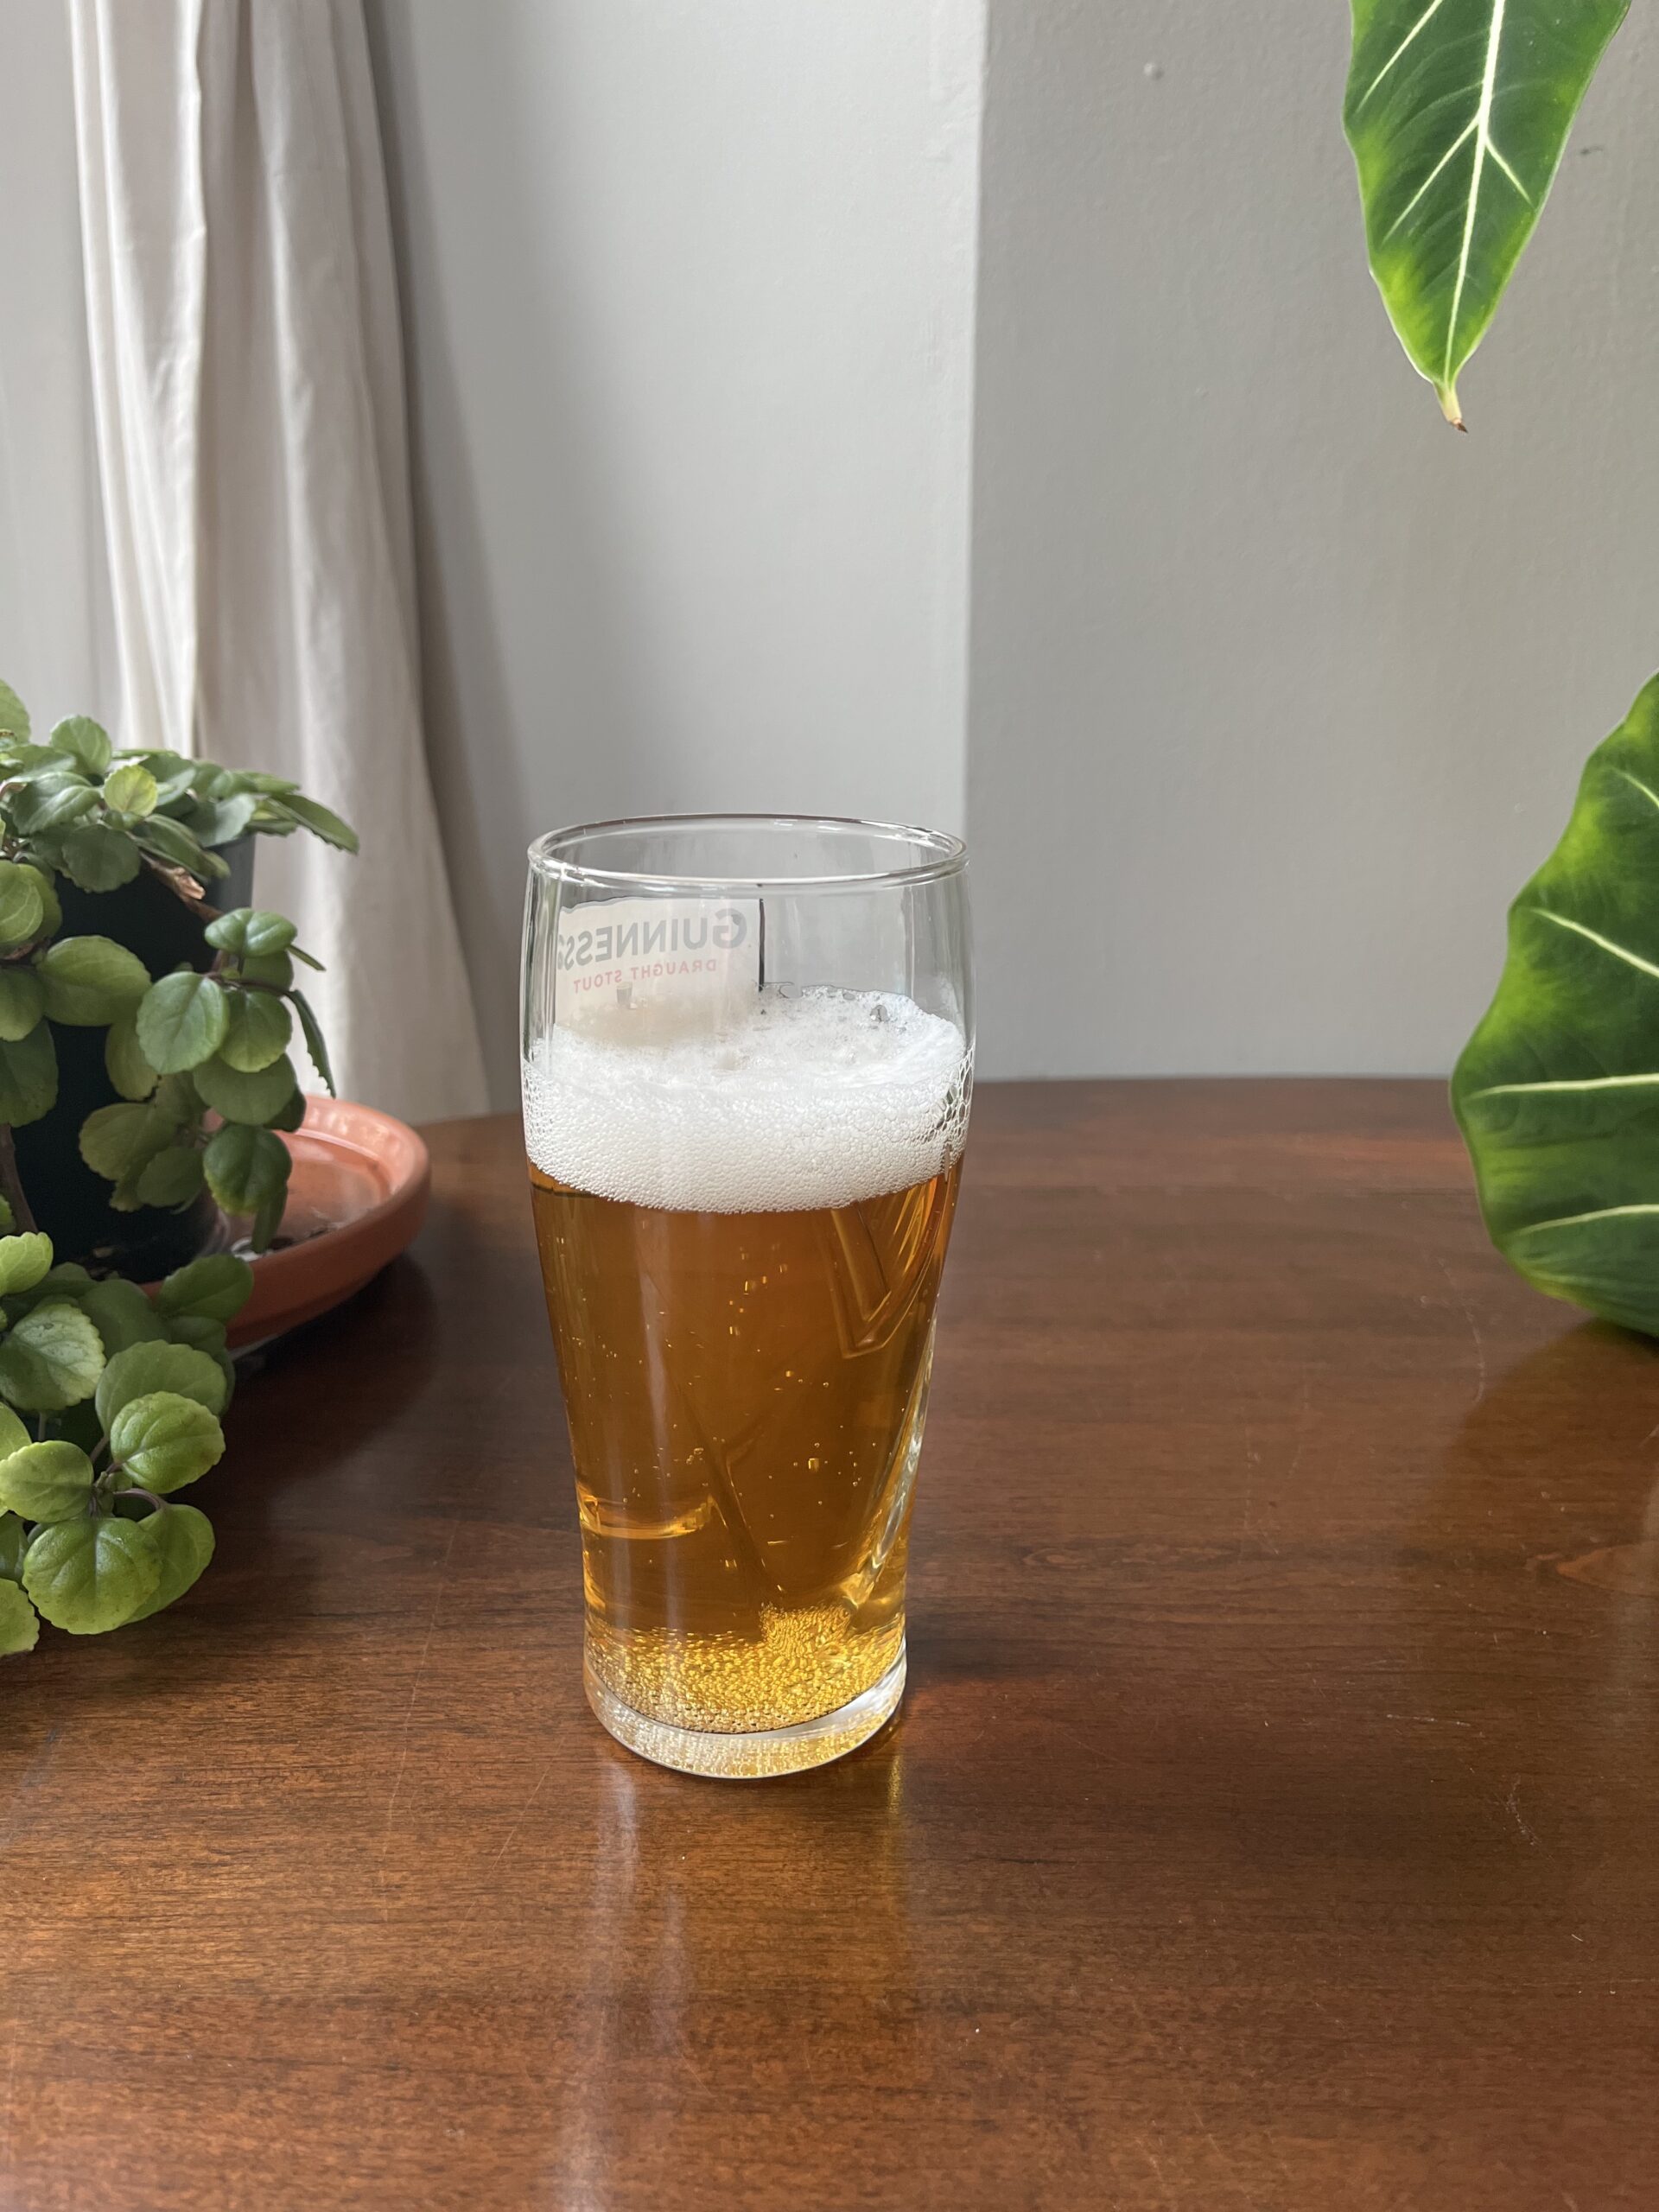 A partially filled glass of beer sits on a wooden table, surrounded by green potted plants.